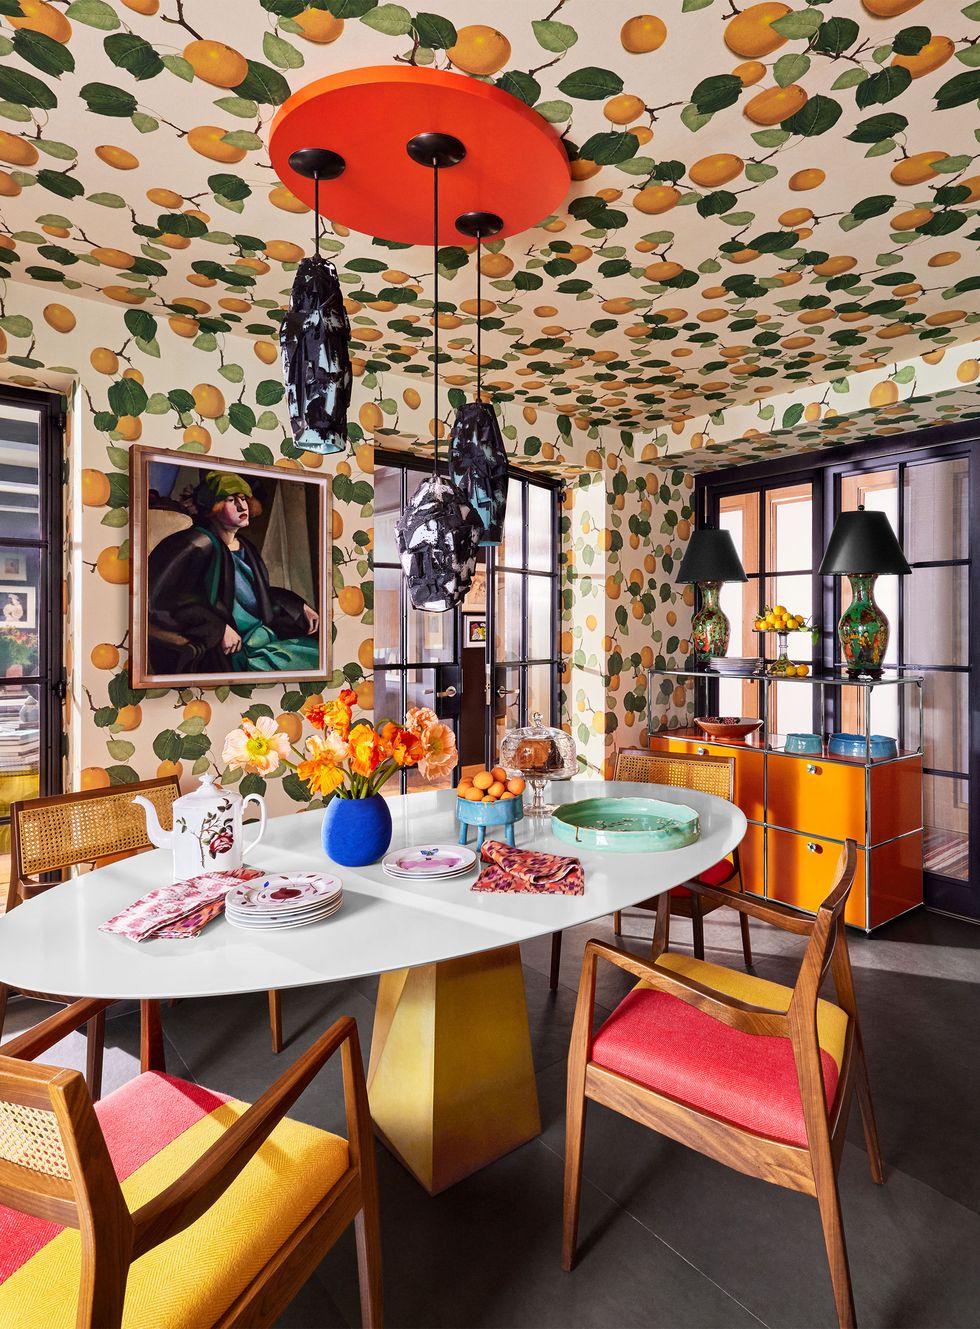 in a dining room a wallpaper in oranges and leaves print covers walls and ceiling, white oval table with four wood chairs with red and yellow cushioned seats, ceiling light with three pendants, orange sideboard with table lamps